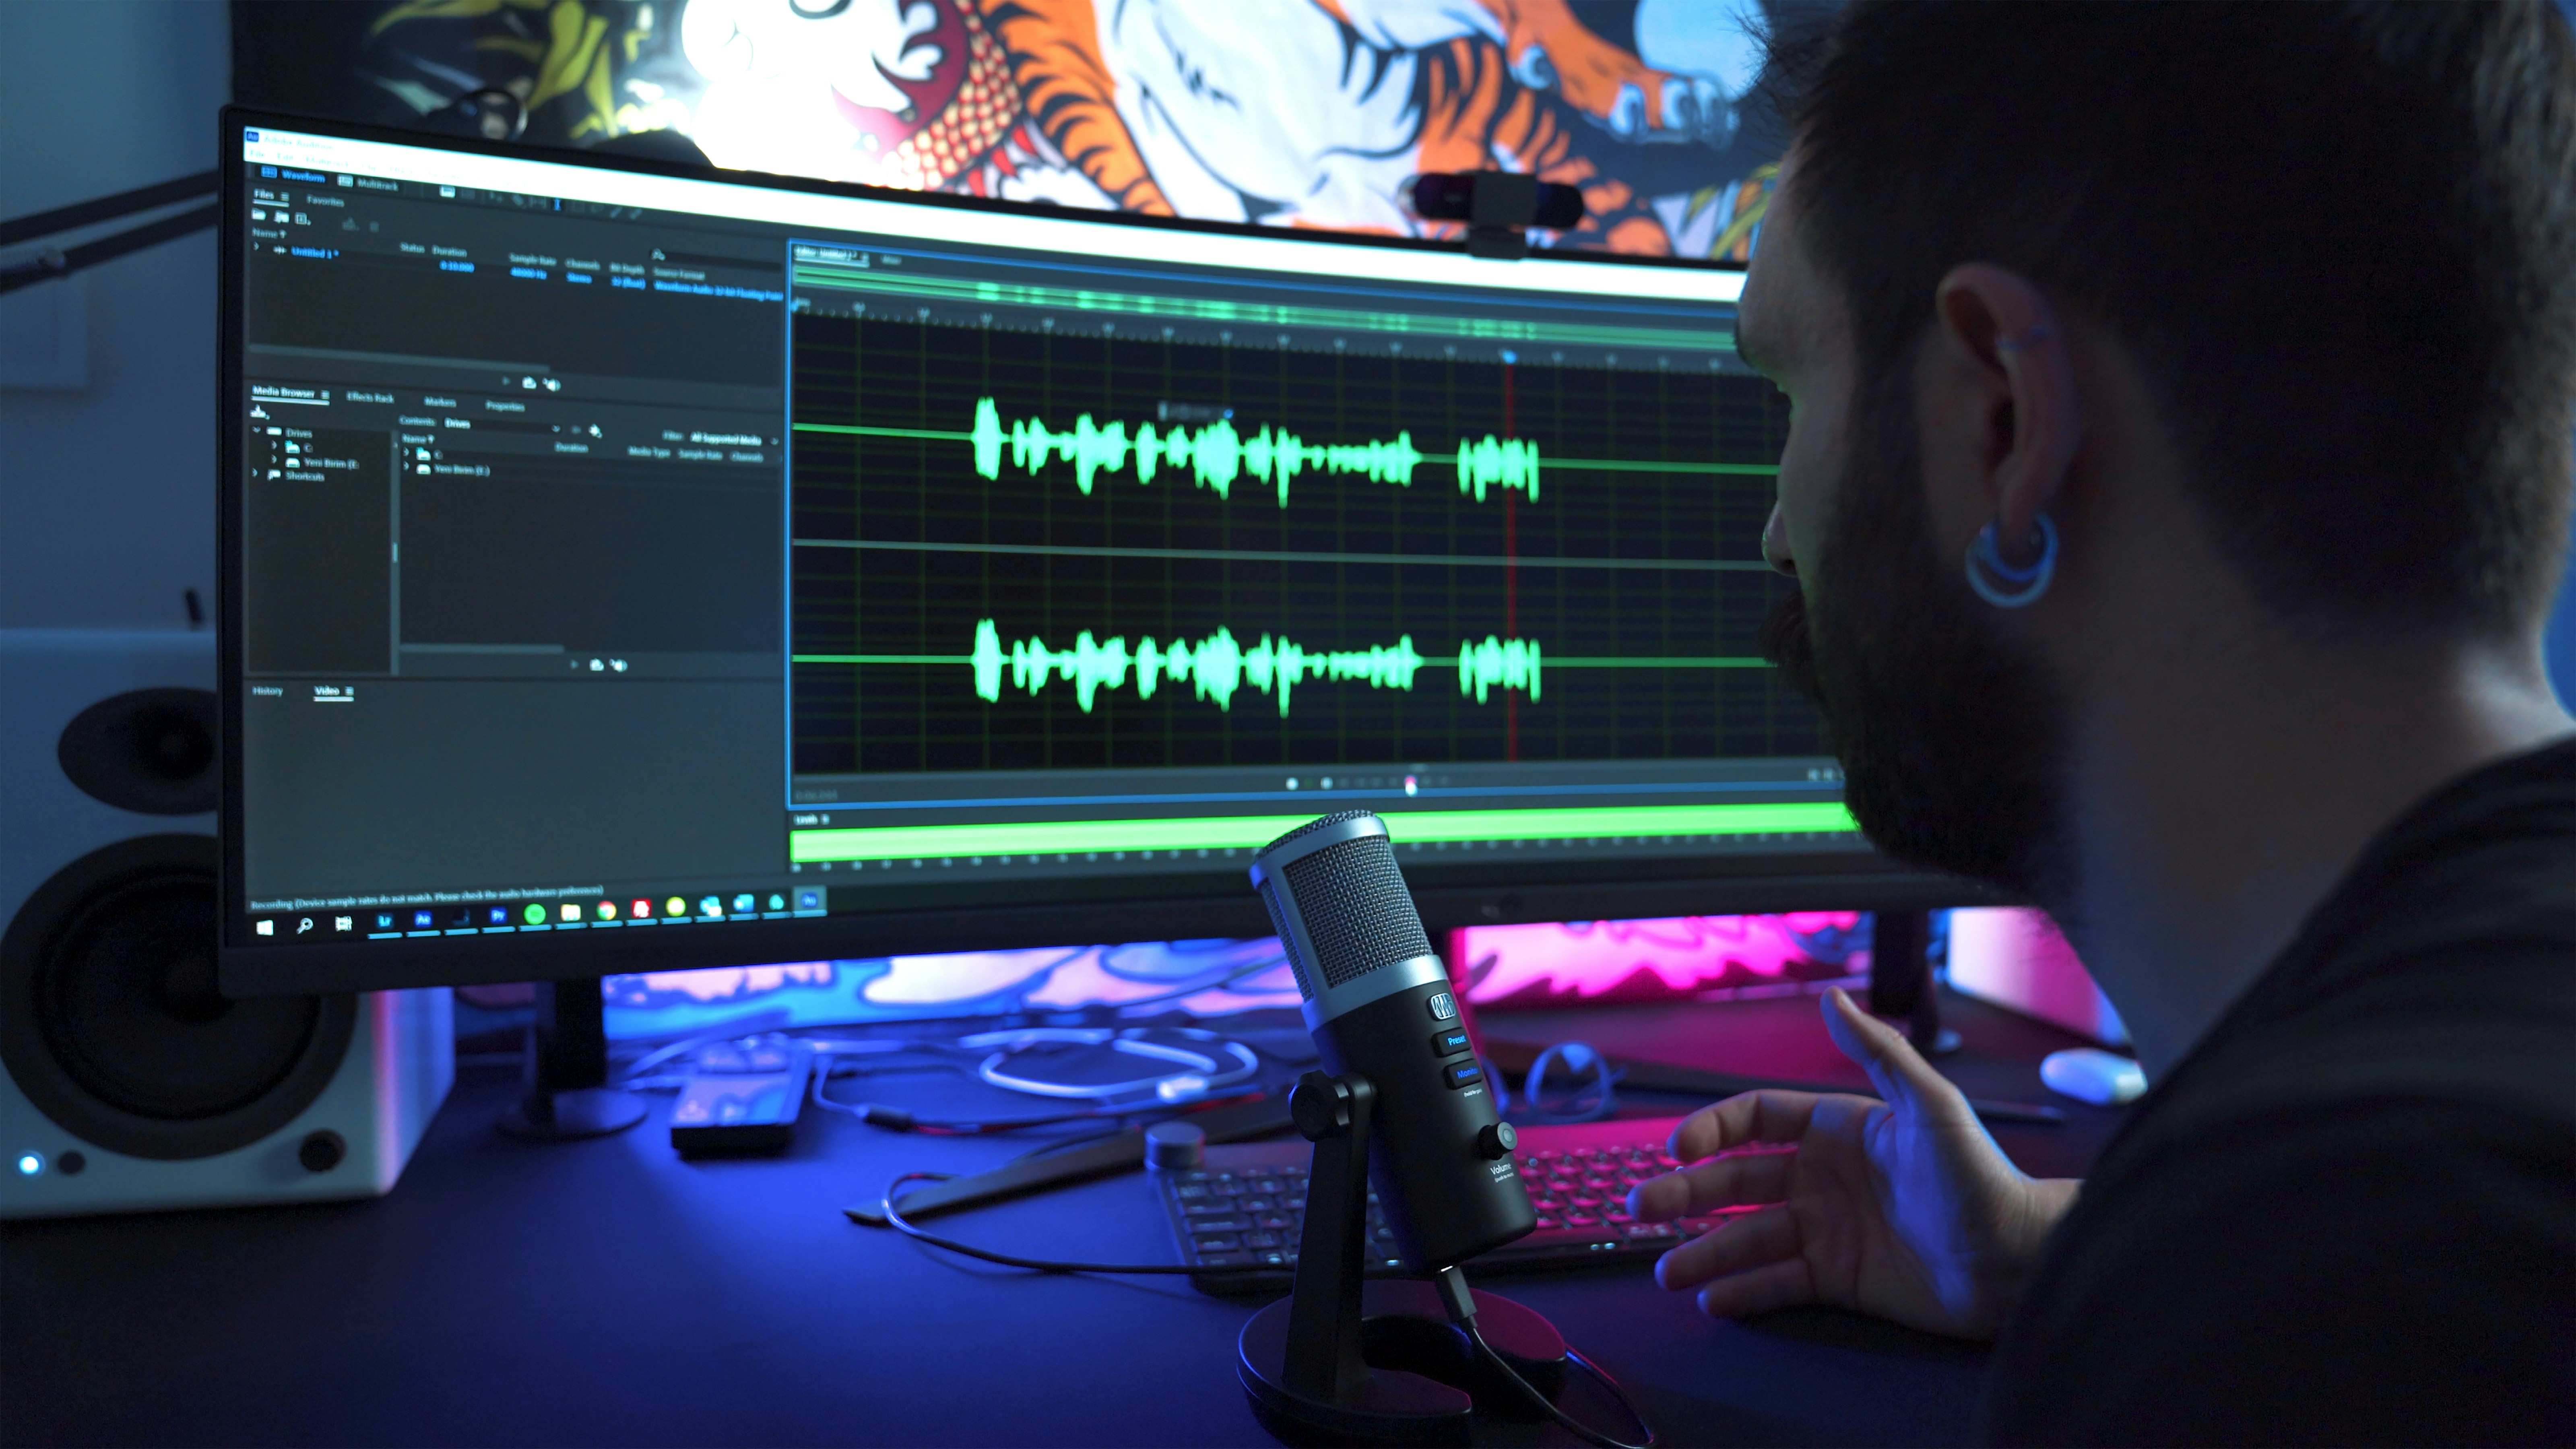 Podcaster making video podcast from his home studio